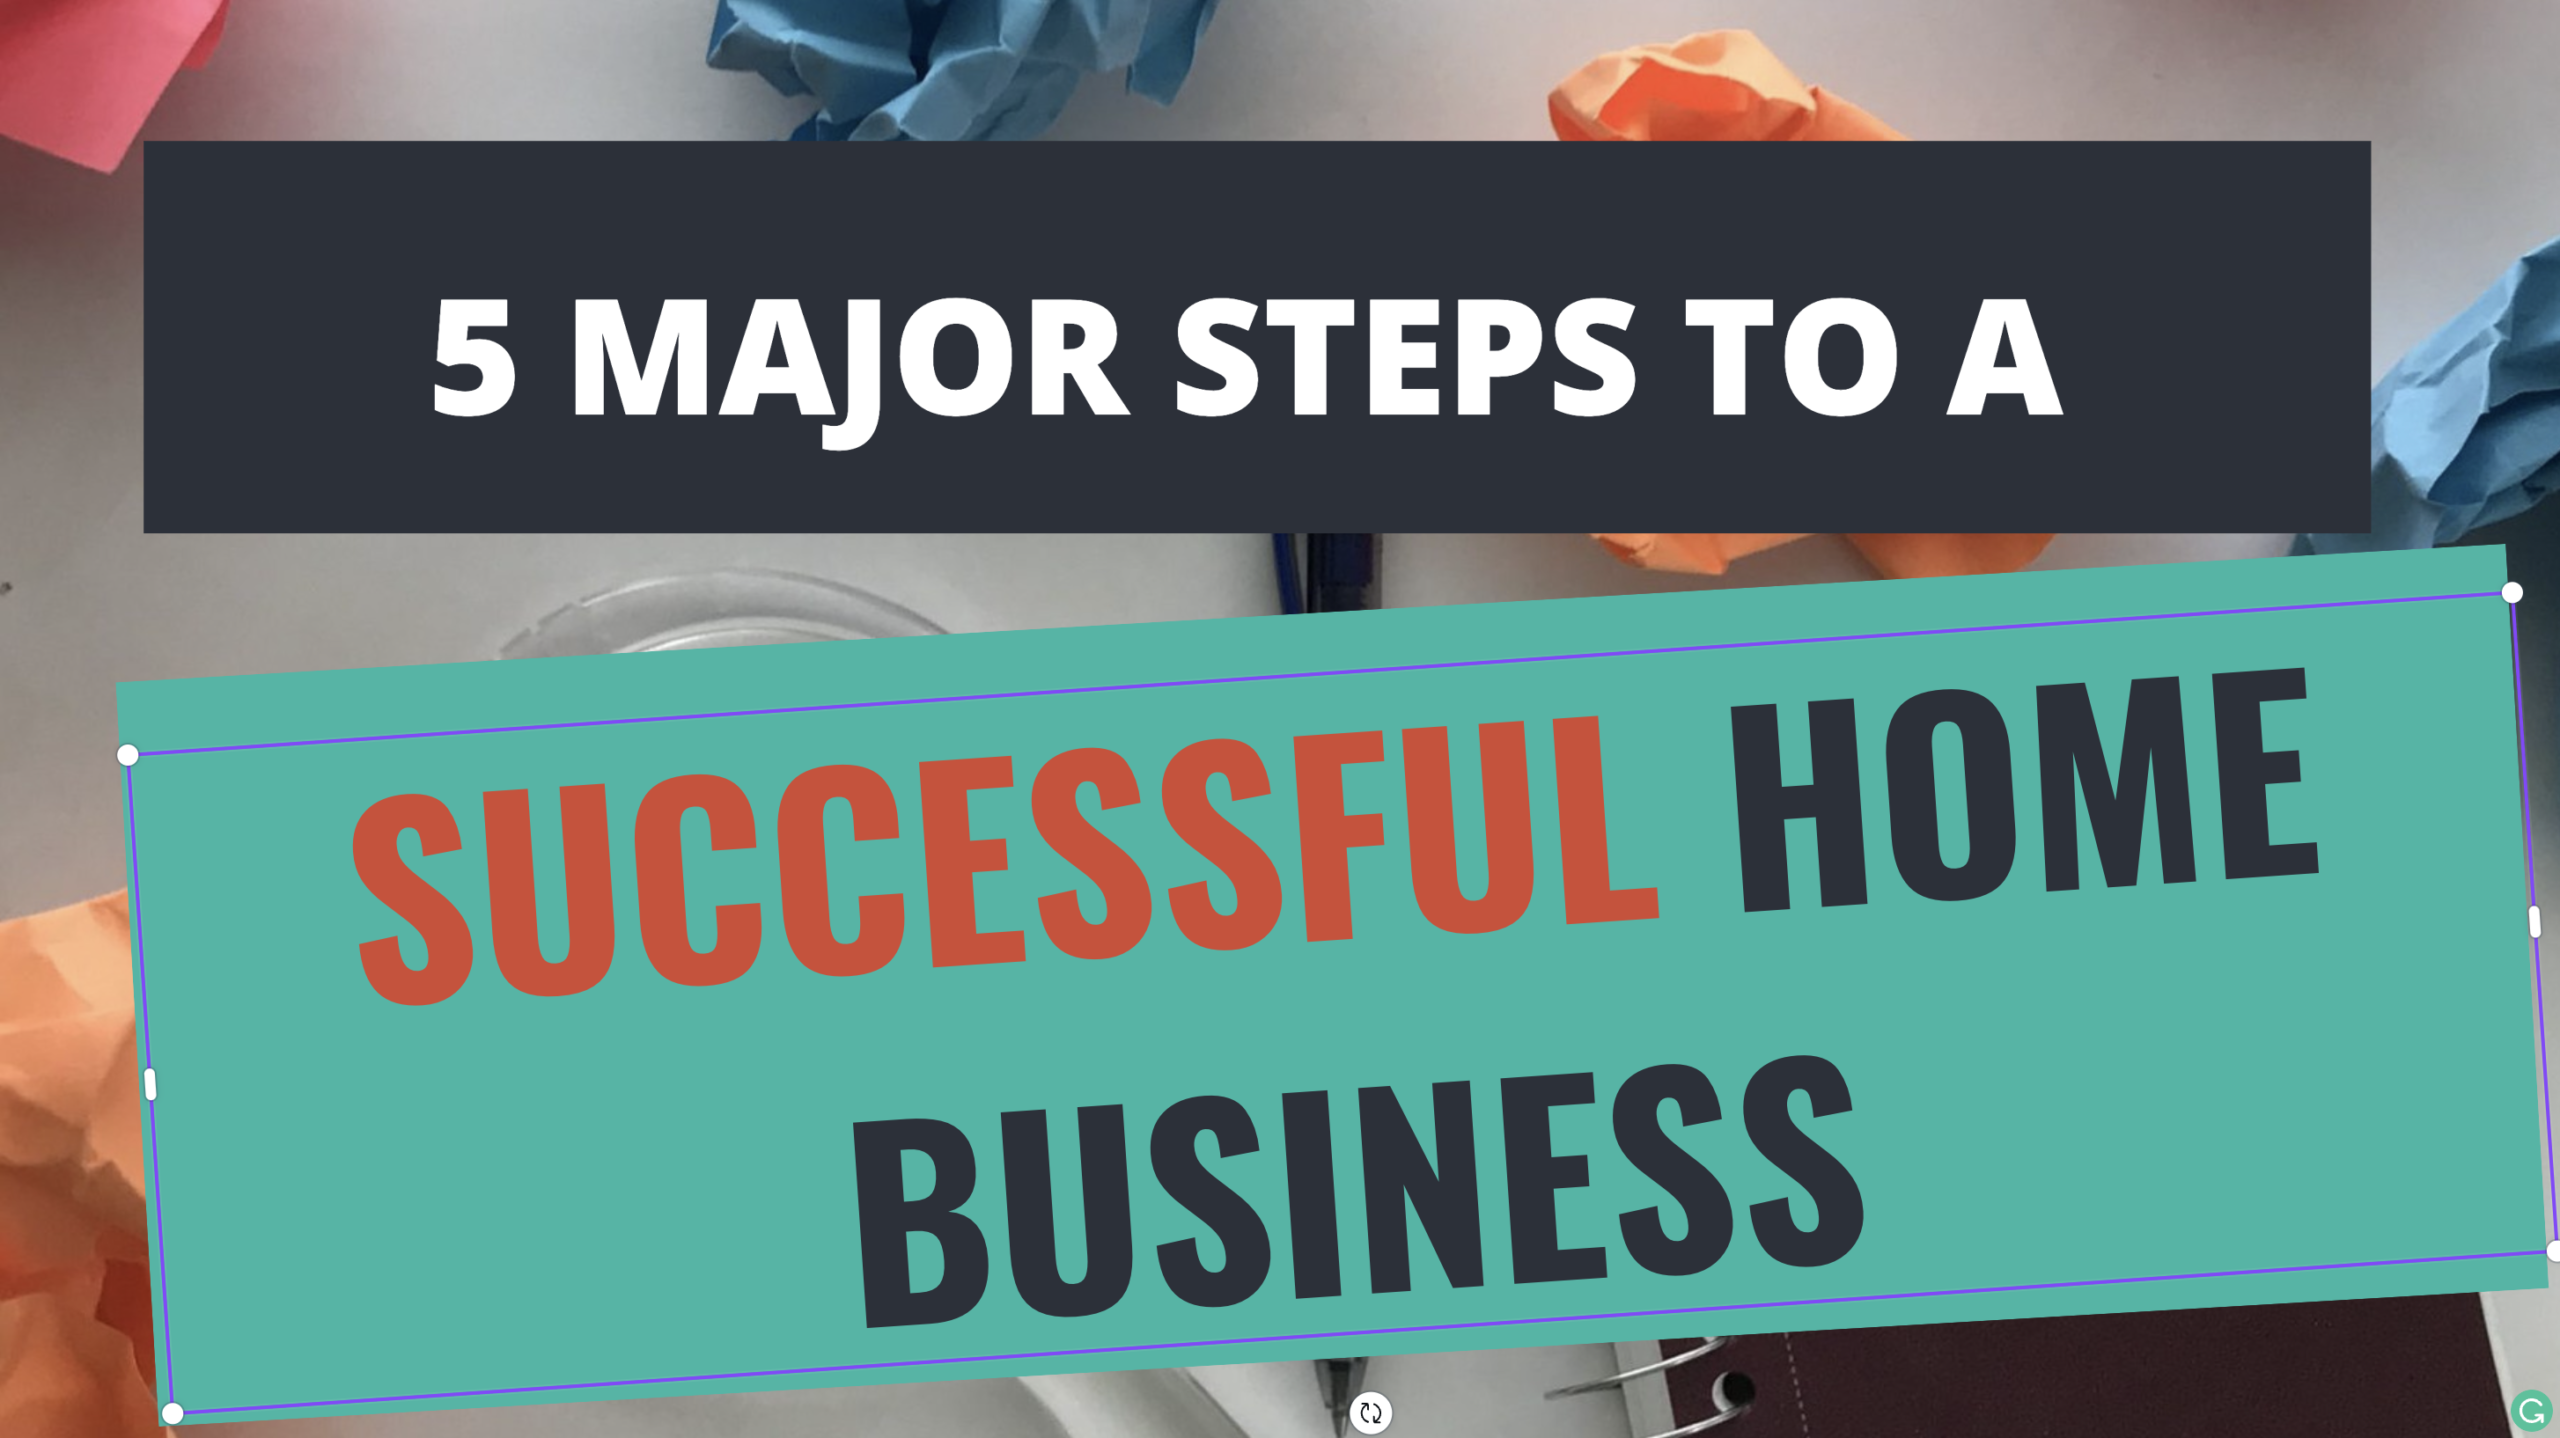 5 Major Steps To A Successful Home Business... Regardless of Your Company, Marketing Strategy, or Level of Experience